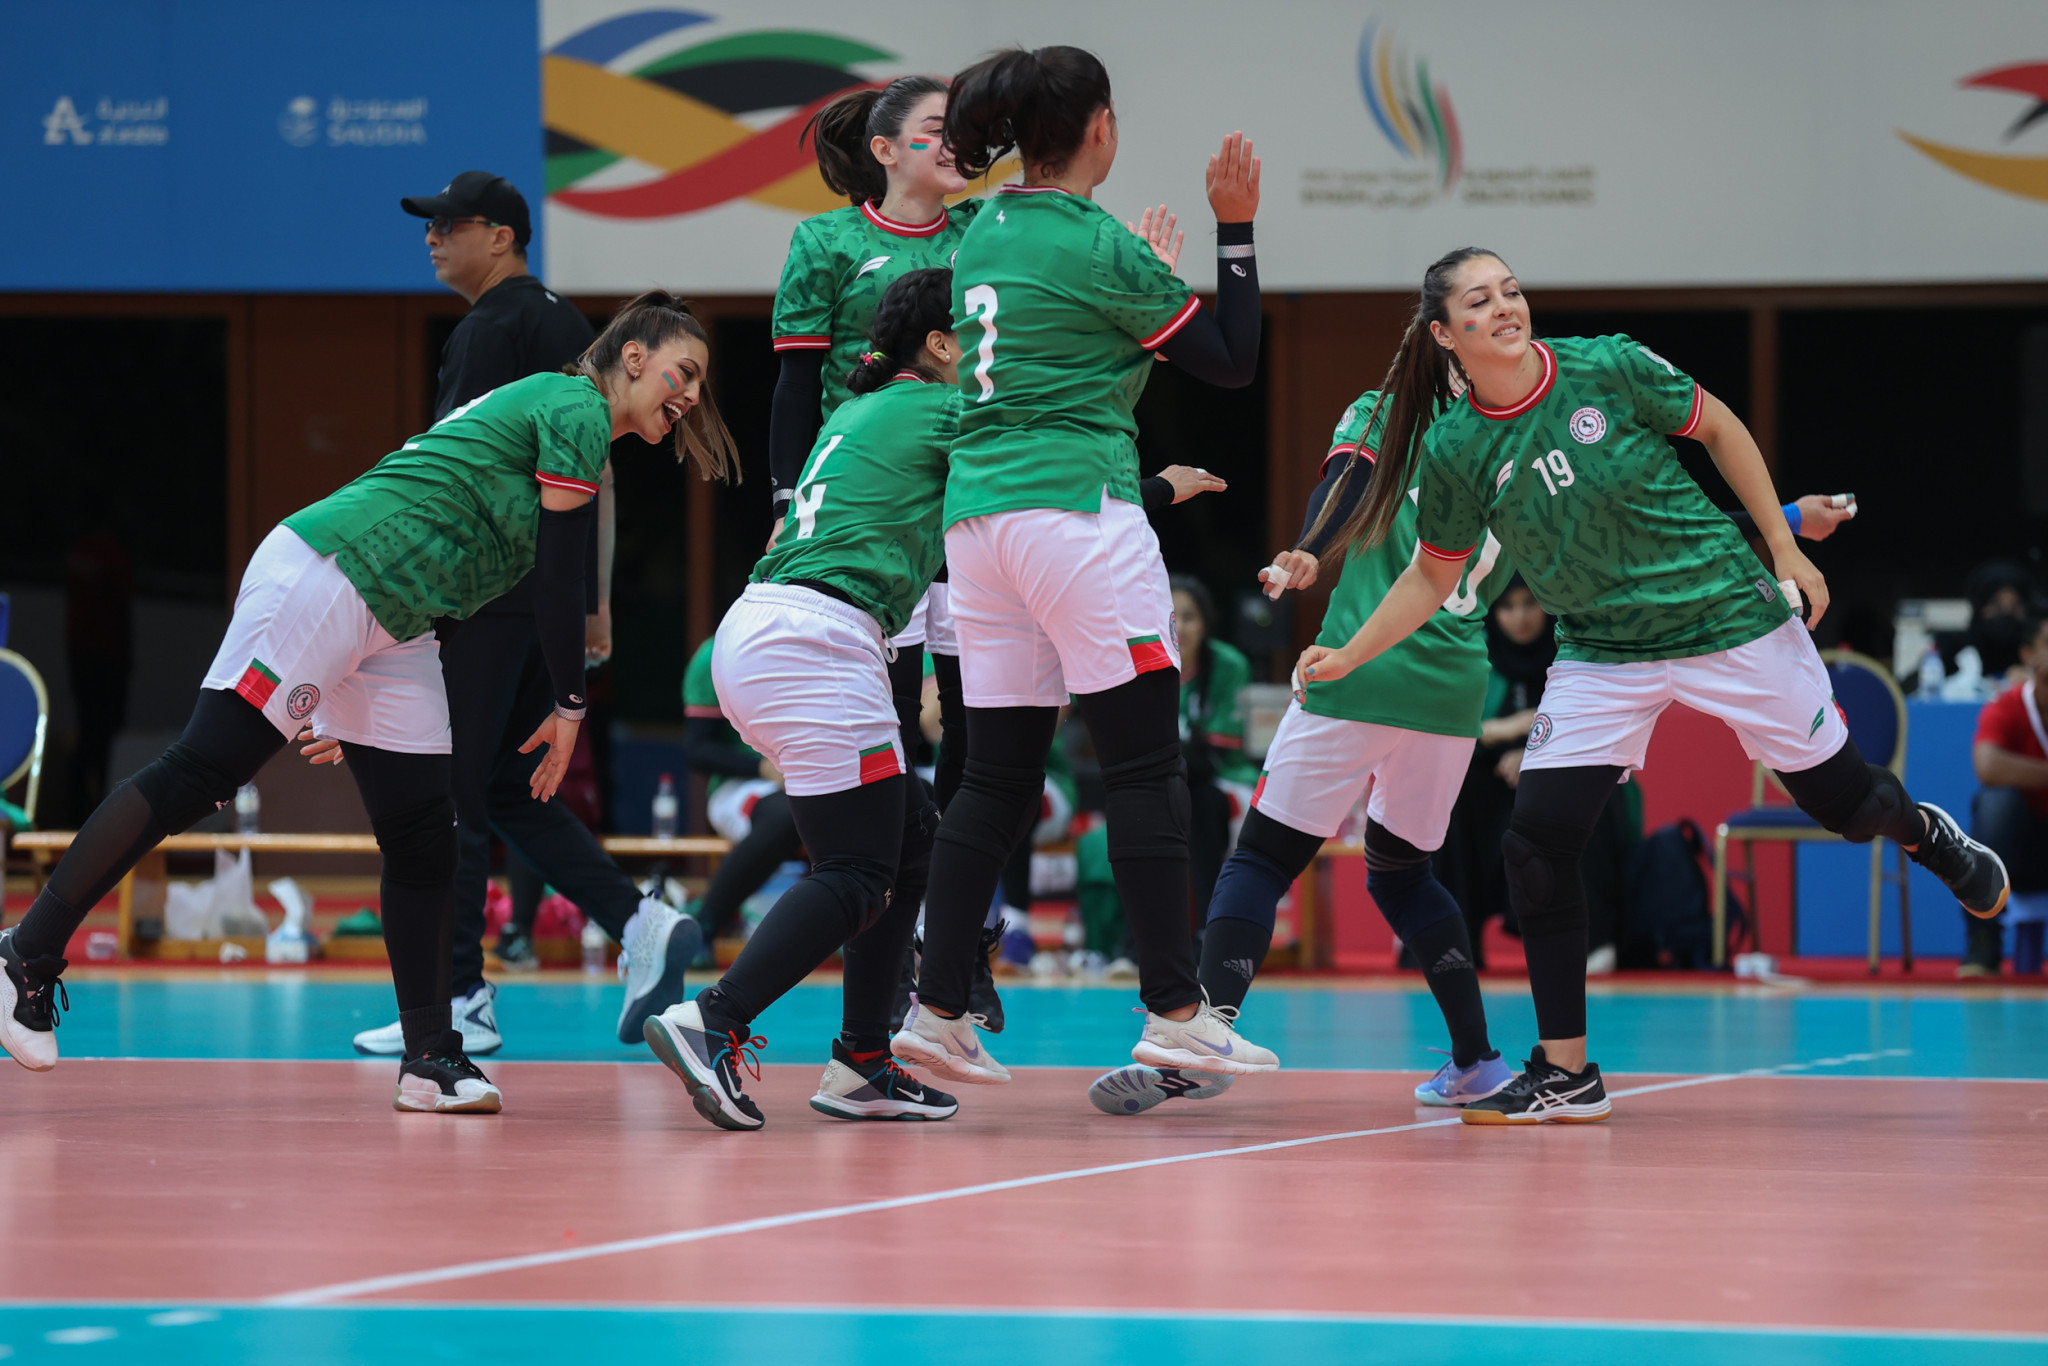 Al-Eitifaq registered a convincing win over Alanka to progress to the women's volleyball final ©Saudi Games